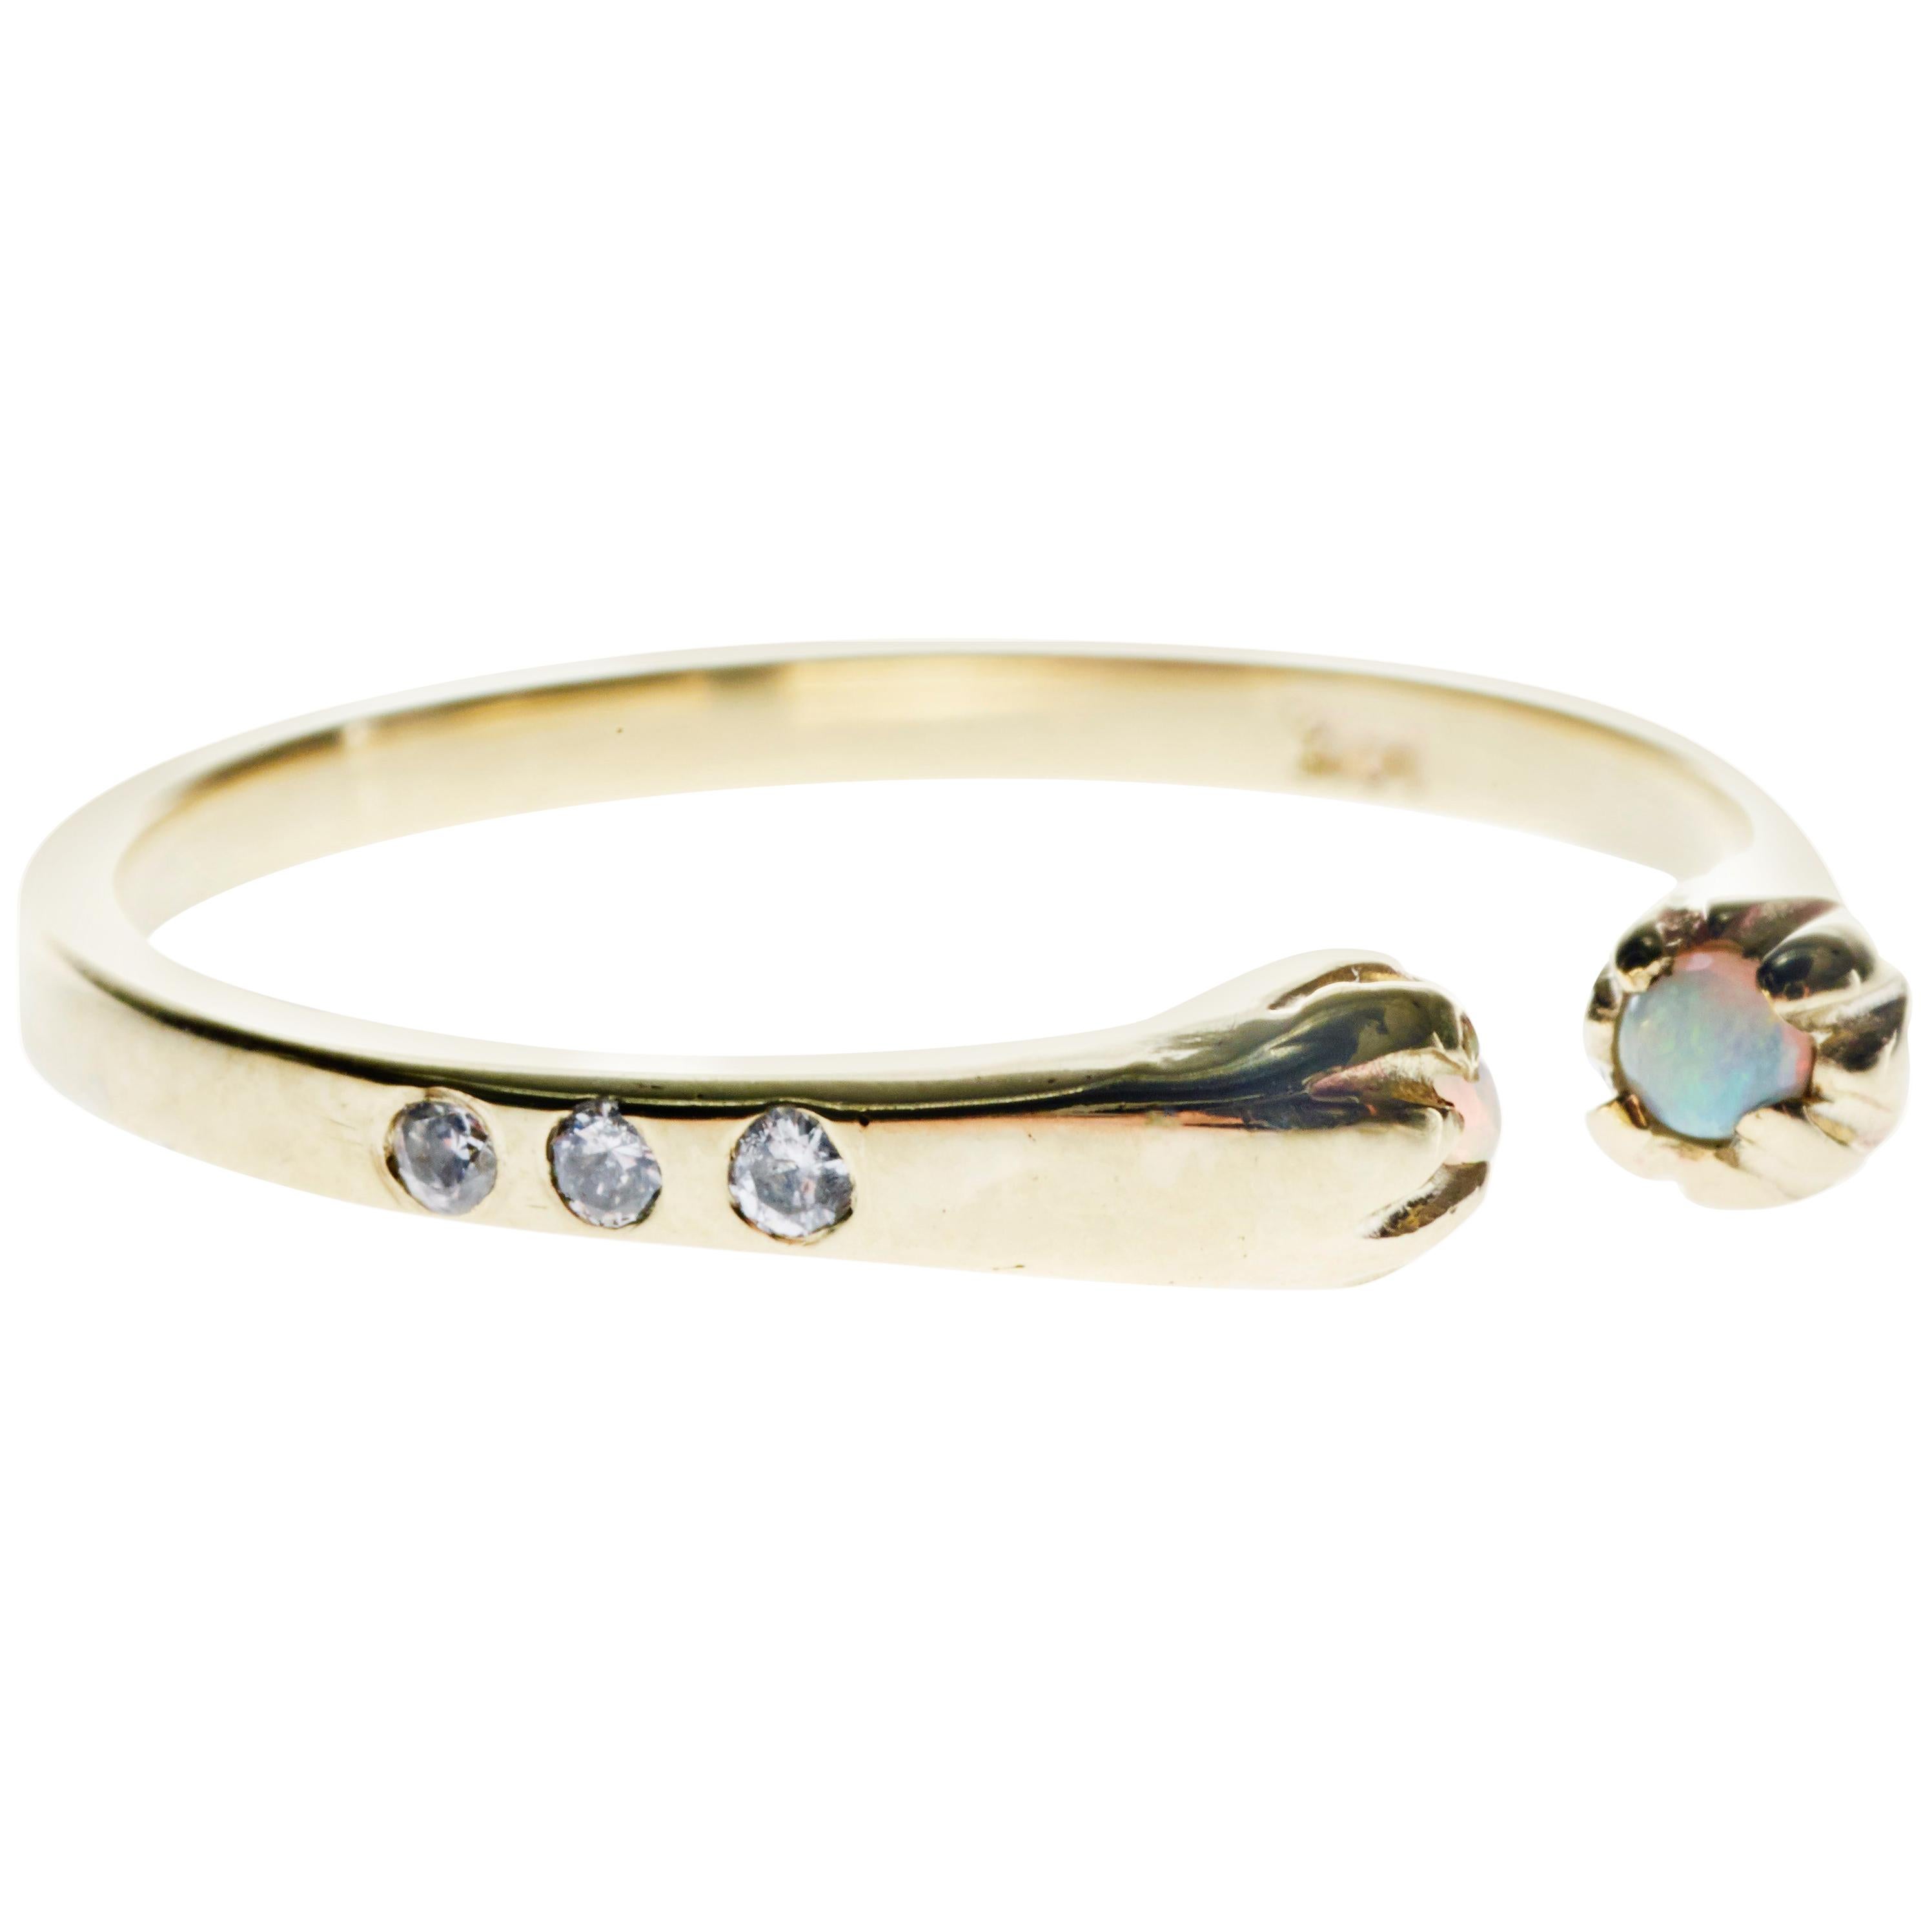 Stack Ring Gold Band Ring White Diamond Opal Adjustable Stackable J Dauphin